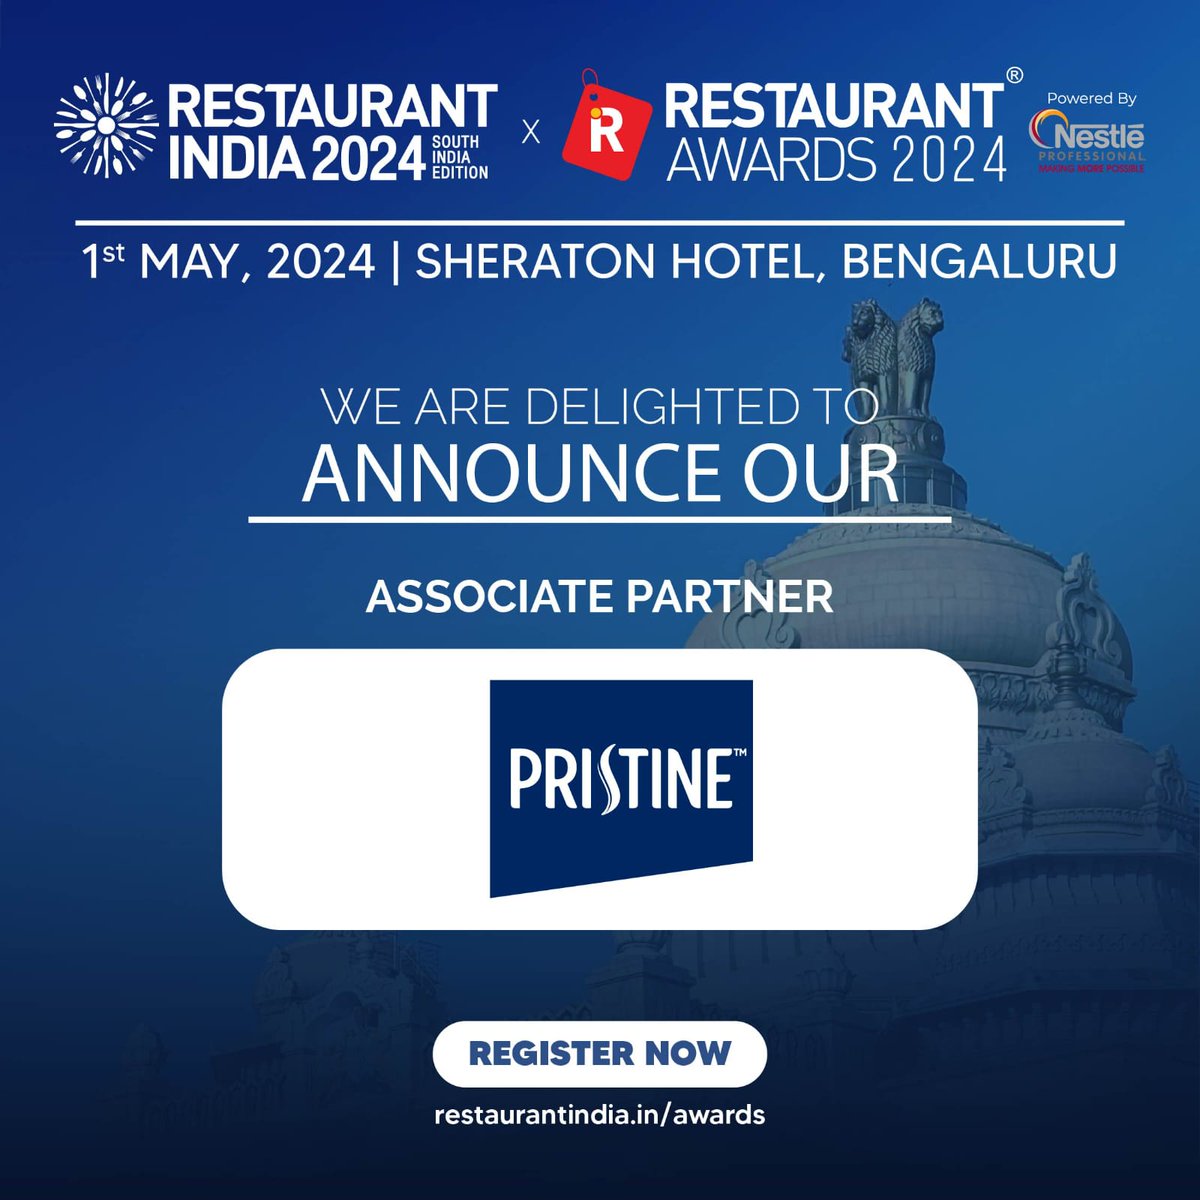 We are delighted to announce Pristine India as our Associate Partner at Restaurant India 2024 South India Edition x Restaurant Awards 2024 1st May 2024, Hotel Sheraton Grand, Brigade Gateway, Bengaluru Register Now: rb.gy/k3q5yf #RA2024 #FoodAndBeverage #Pristine